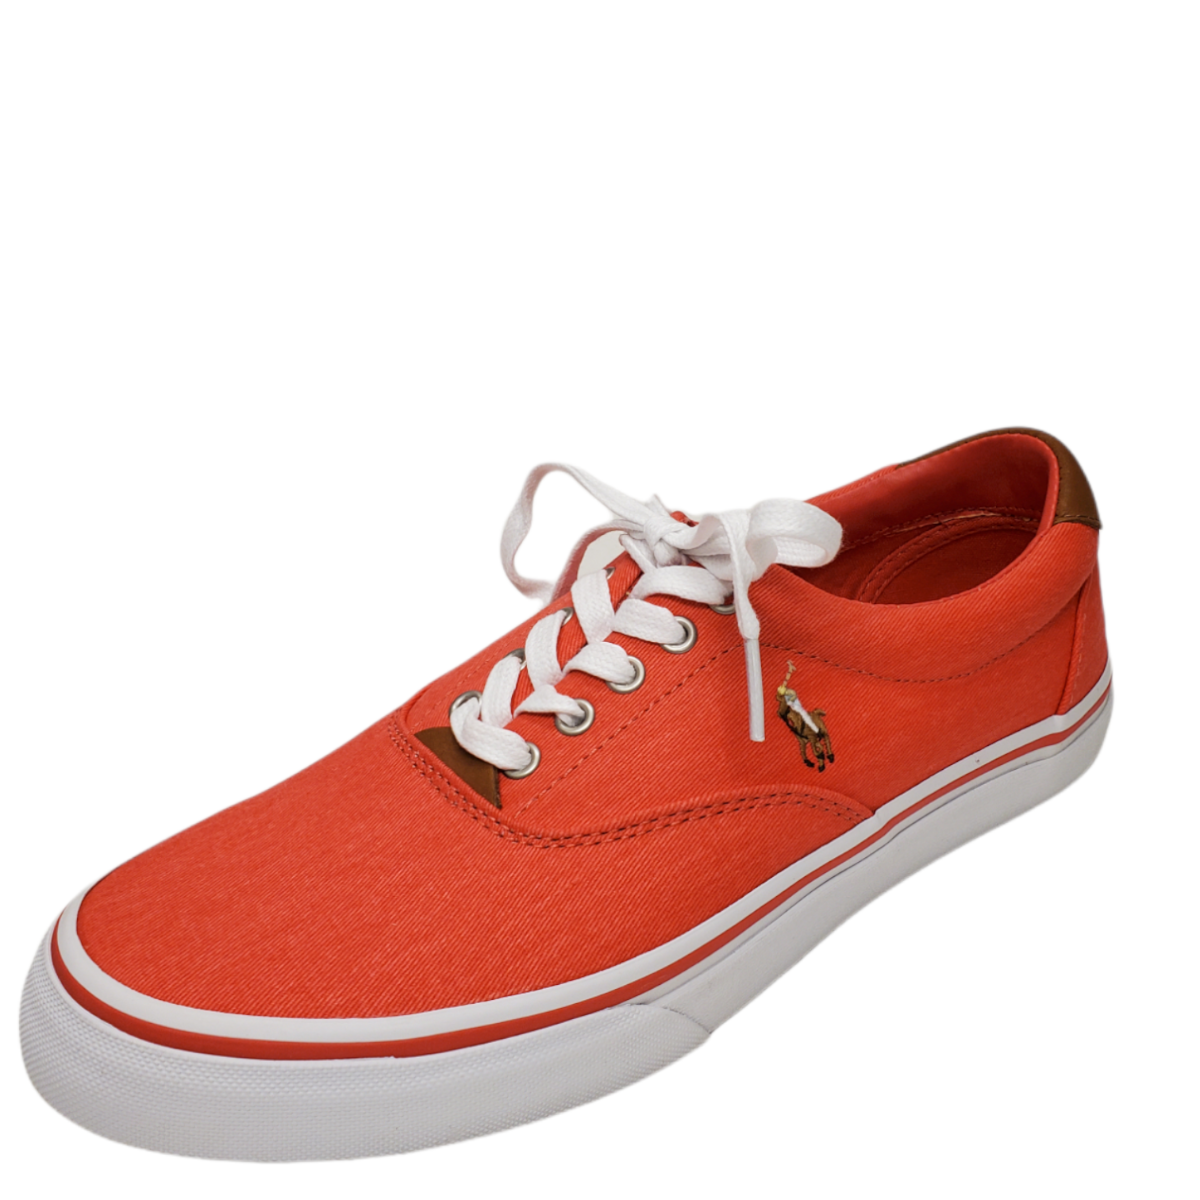 Buy Red Tape Men's Blue Casual Sneakers at Best Price @ Tata CLiQ